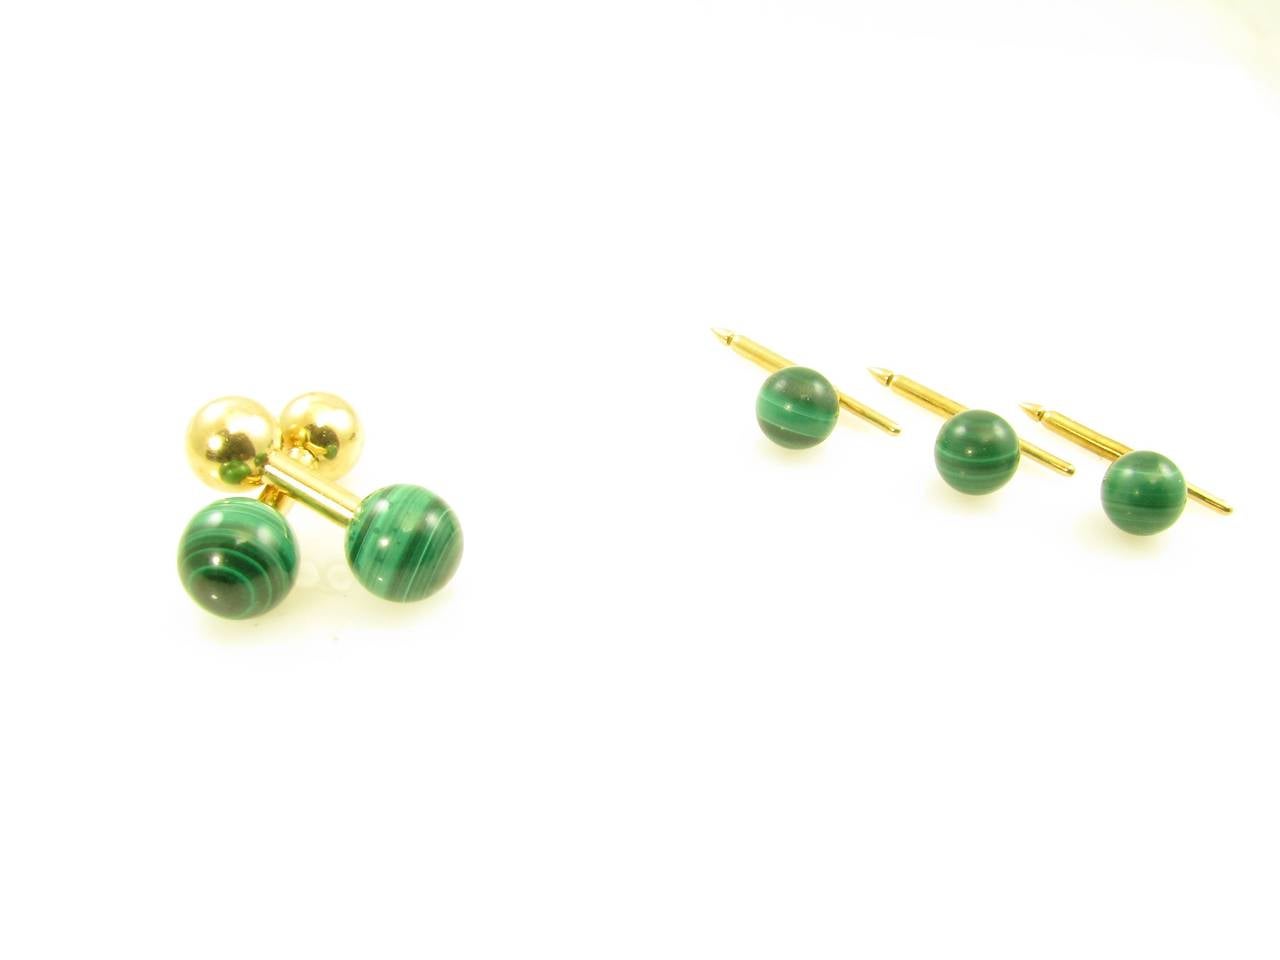 A 14 karat yellow gold and malachite 5 piece “barbell” style dress set, the cufflinks signed Tiffany & Co. 14K.  The set comprises a pair of cufflinks with a malachite ball at one end, and a smaller gold ball at the other end; and 3 malachite and